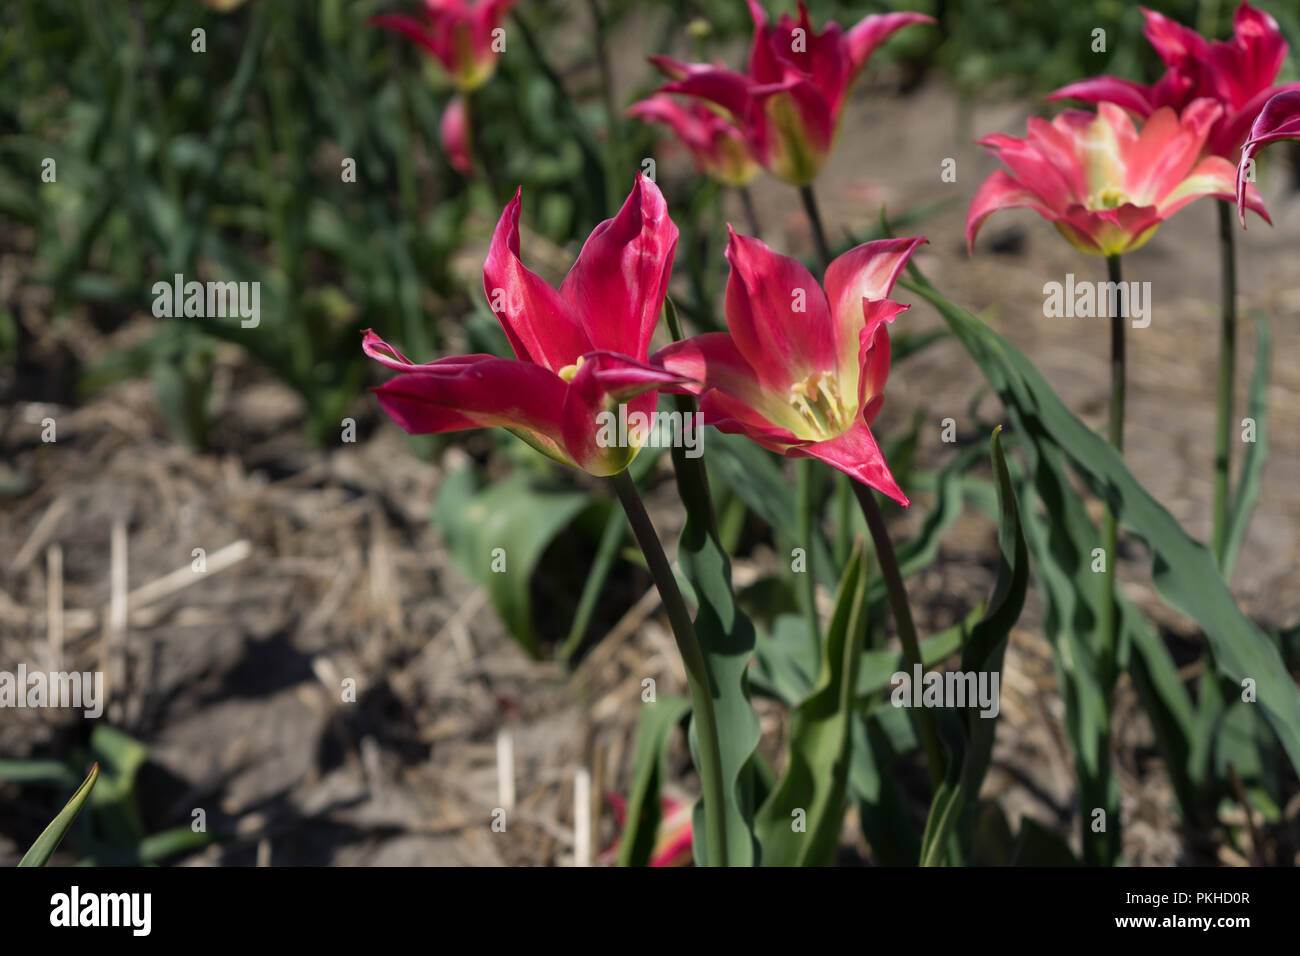 Netherlands,Lisse,Europe, a pink flower on a plant Stock Photo